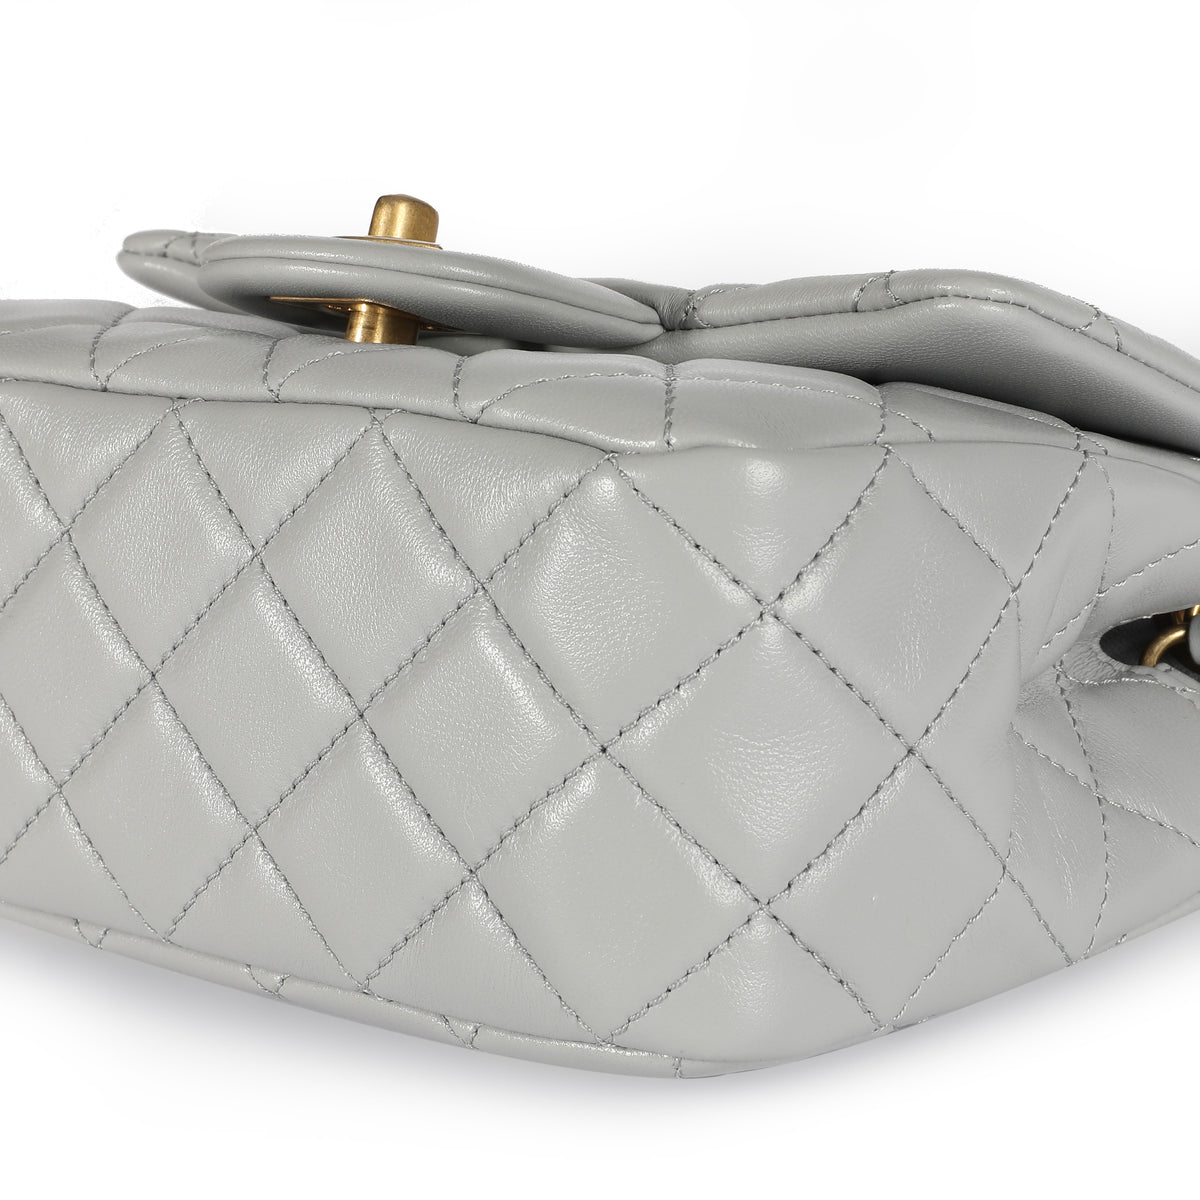 Chanel Gray Quilted Lambskin Pearl Crush Mini Flap Bag by WP